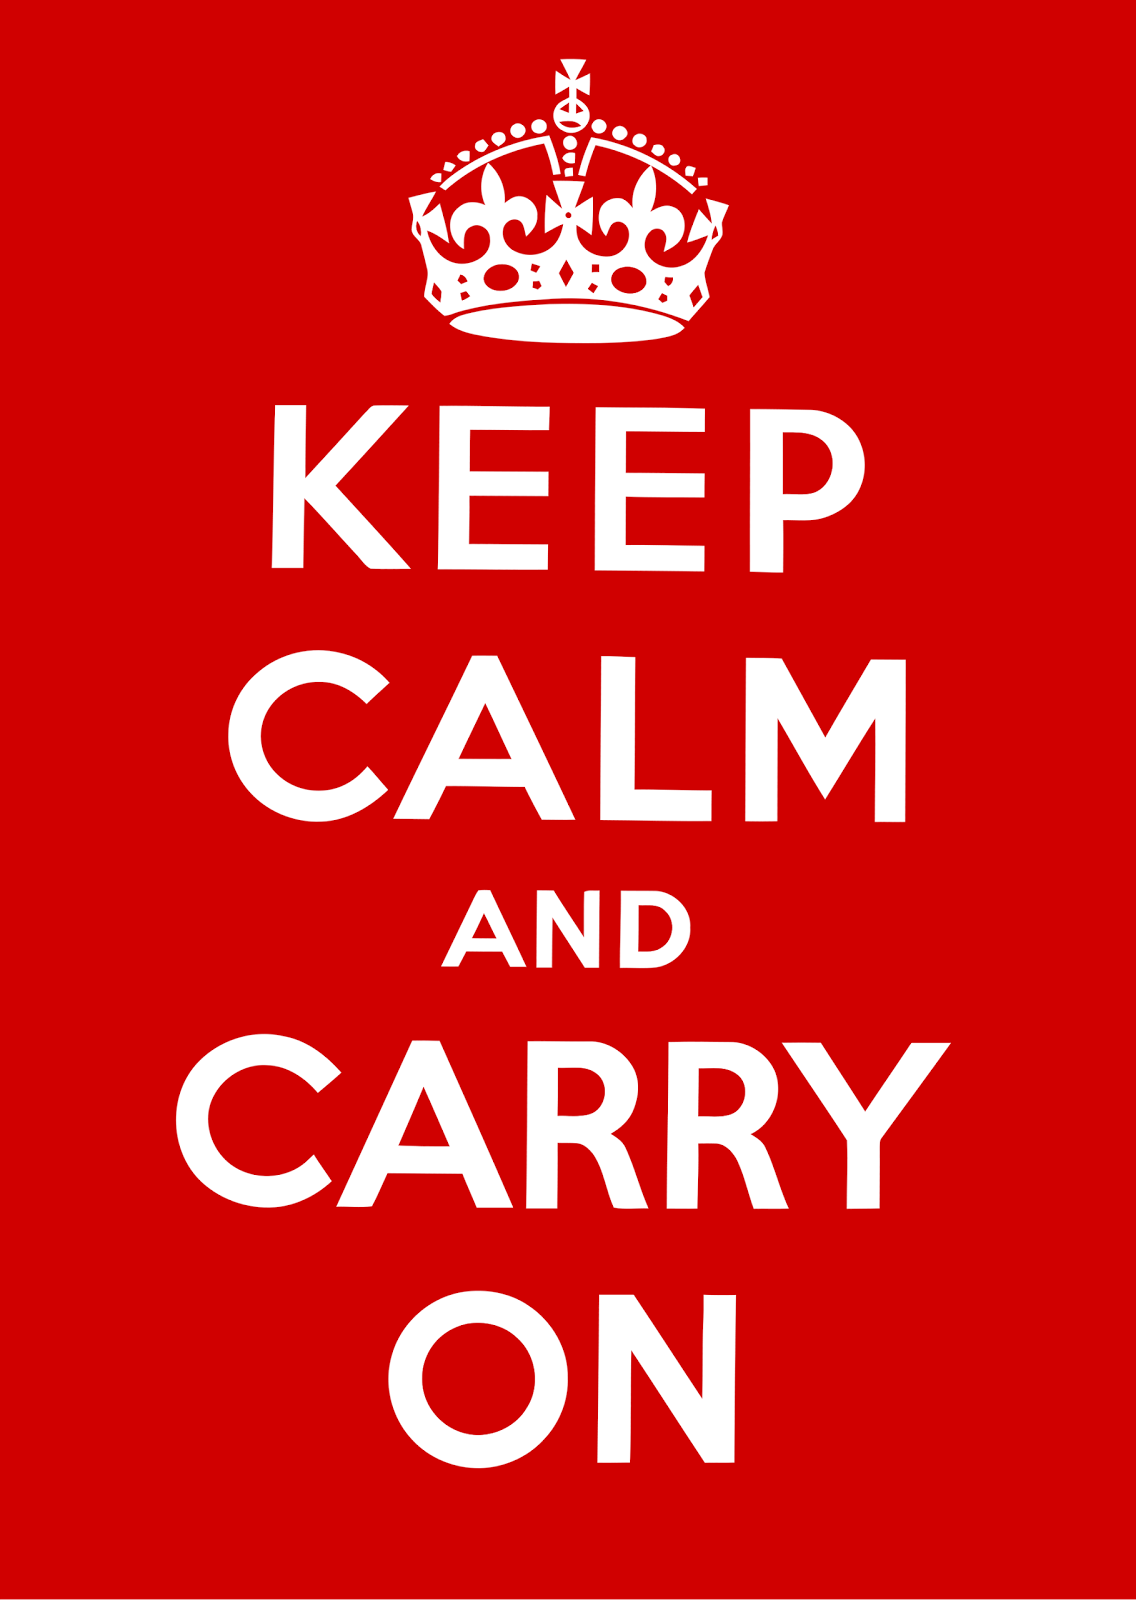 [2000px-Keep-calm-and-carry-on.svg.png]